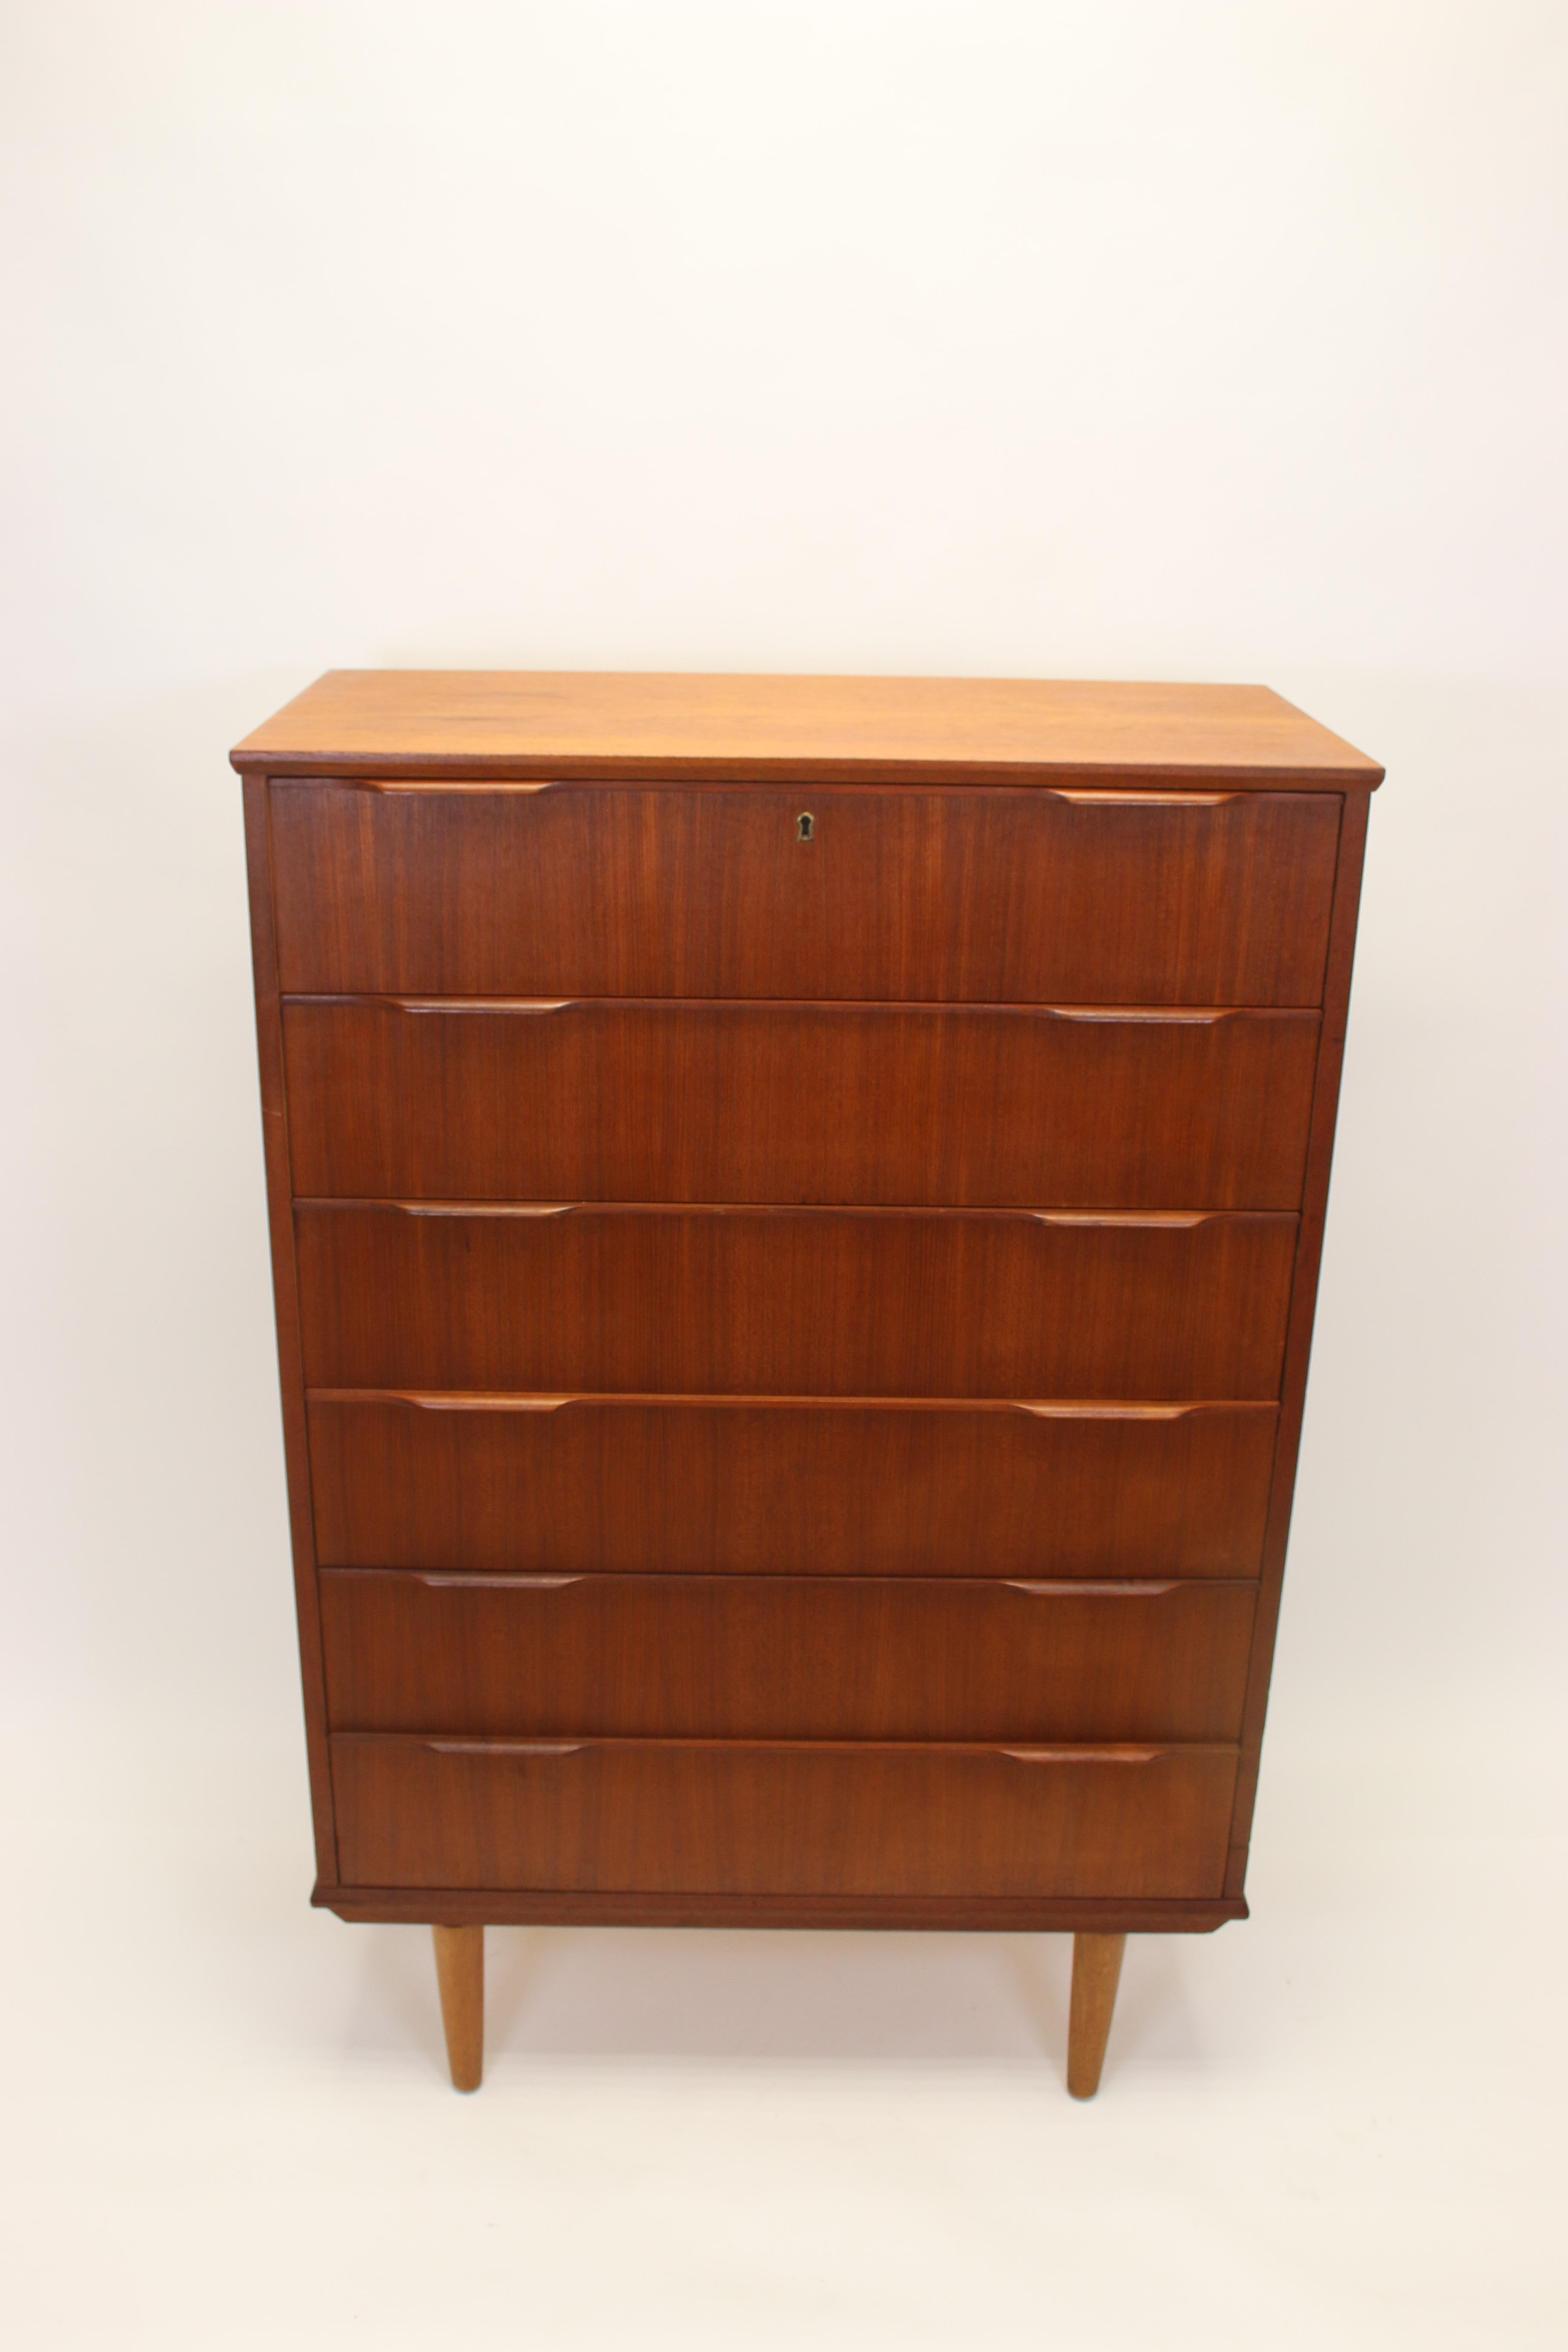 Danish Teak Chest of Drawers with 6 Drawers 2